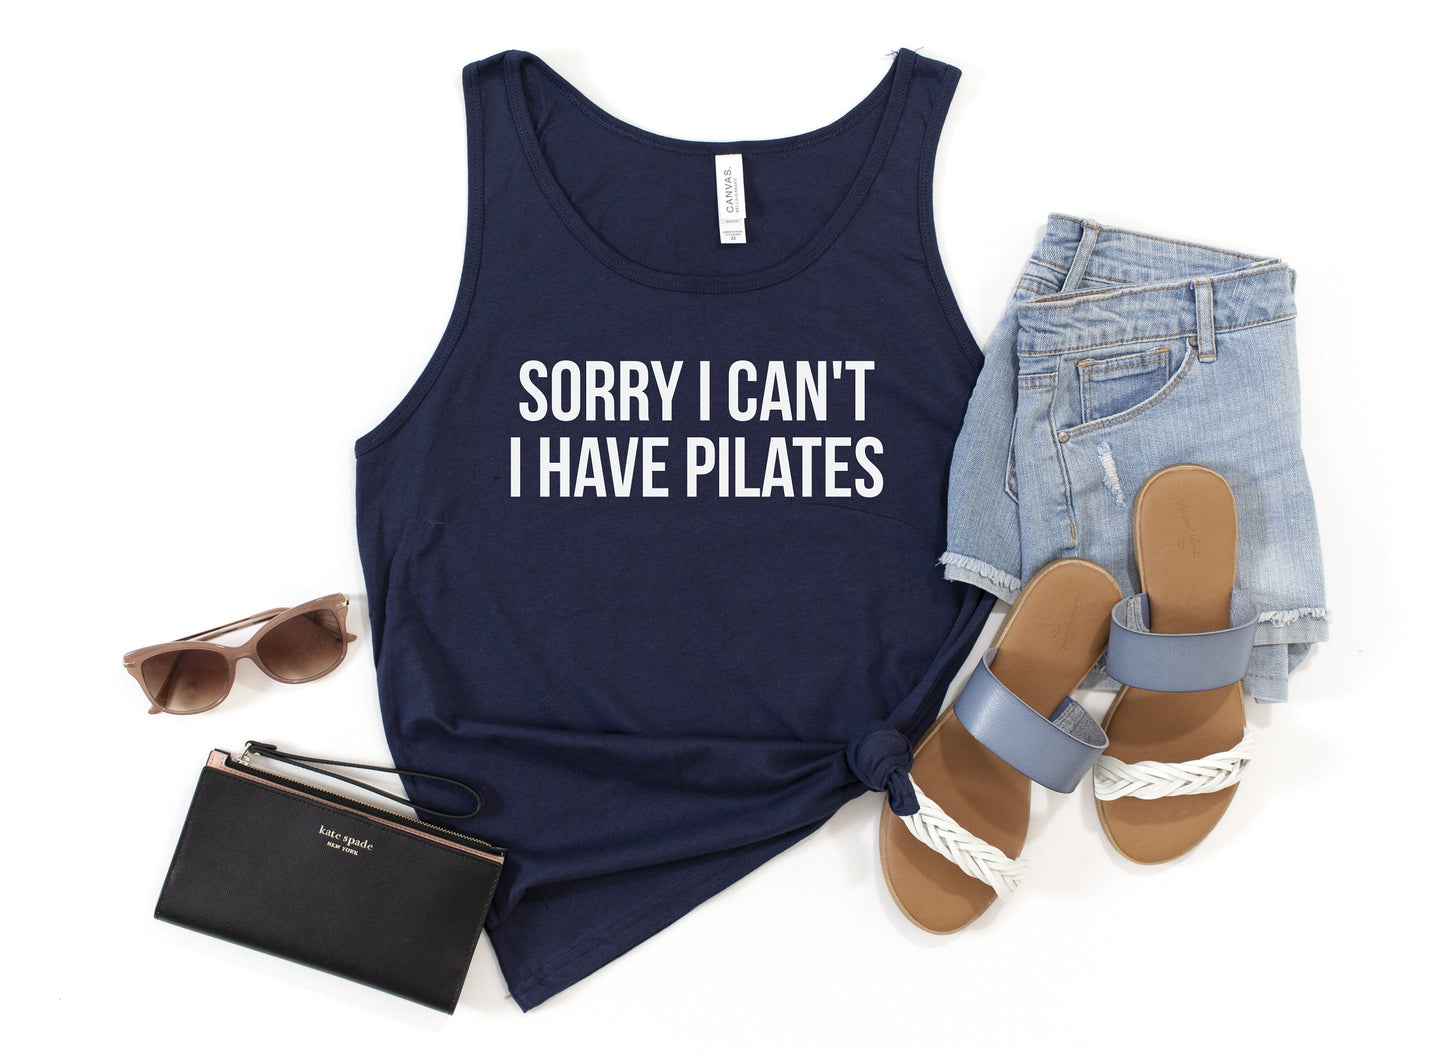 Sorry I Can't, I Have Pilates Tank Top